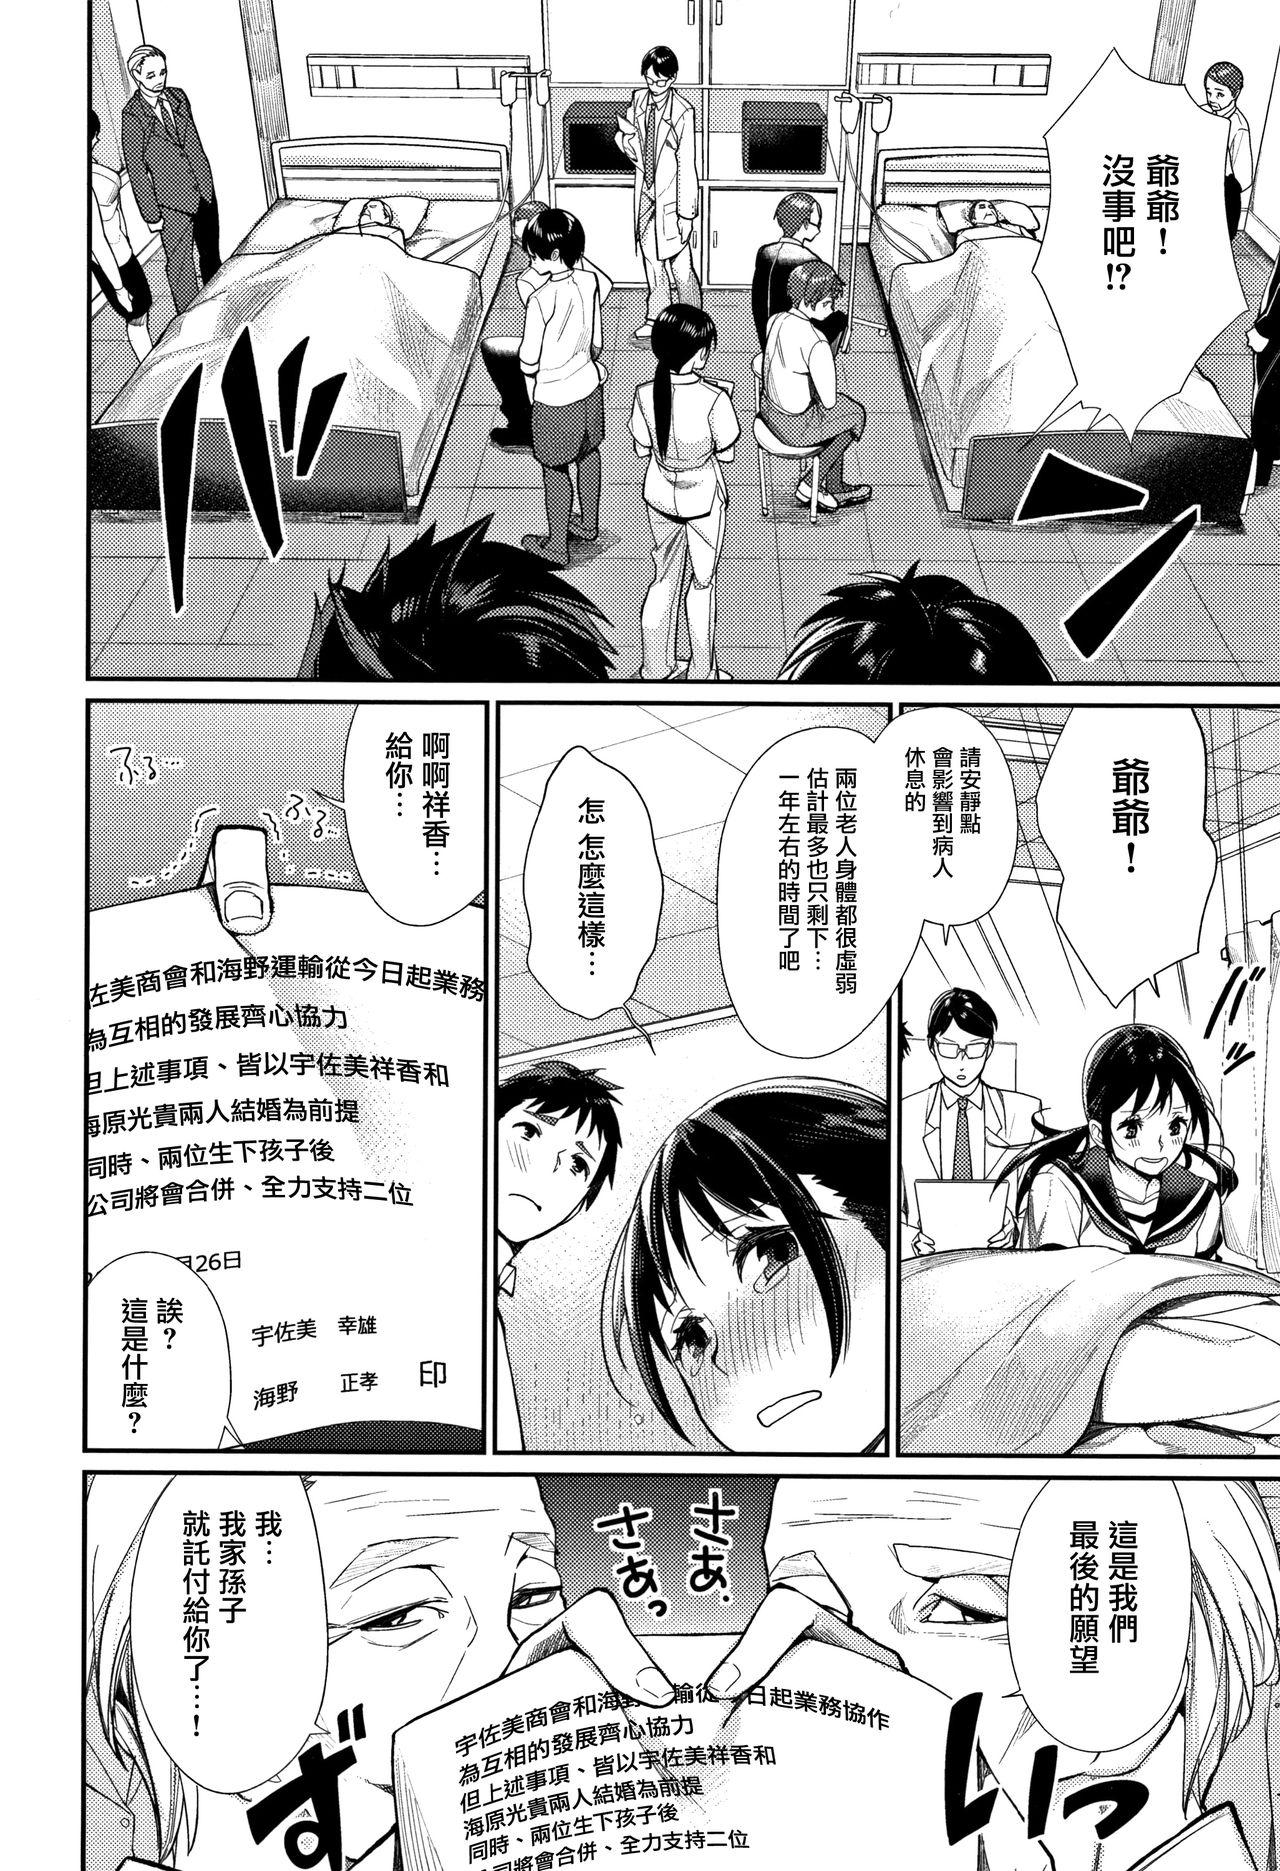 [MGMEE] Bokura no Etude - Our H Chu Do Ch.1-6 [Chinese] [無邪気漢化組] 77